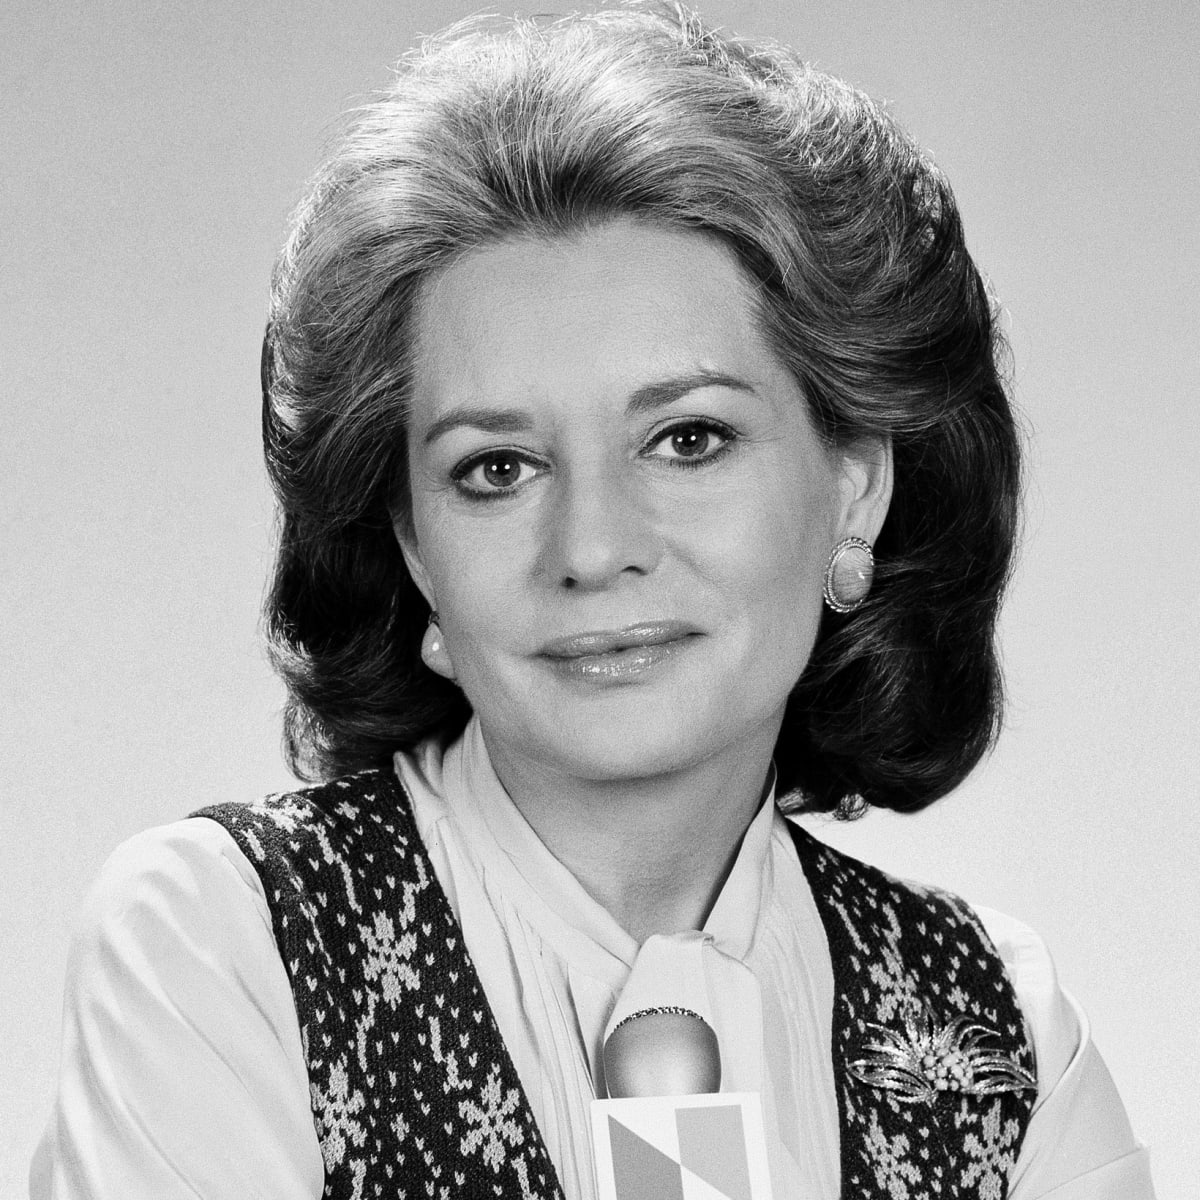 Remembering barbara walters with of her most interesting profound quotes